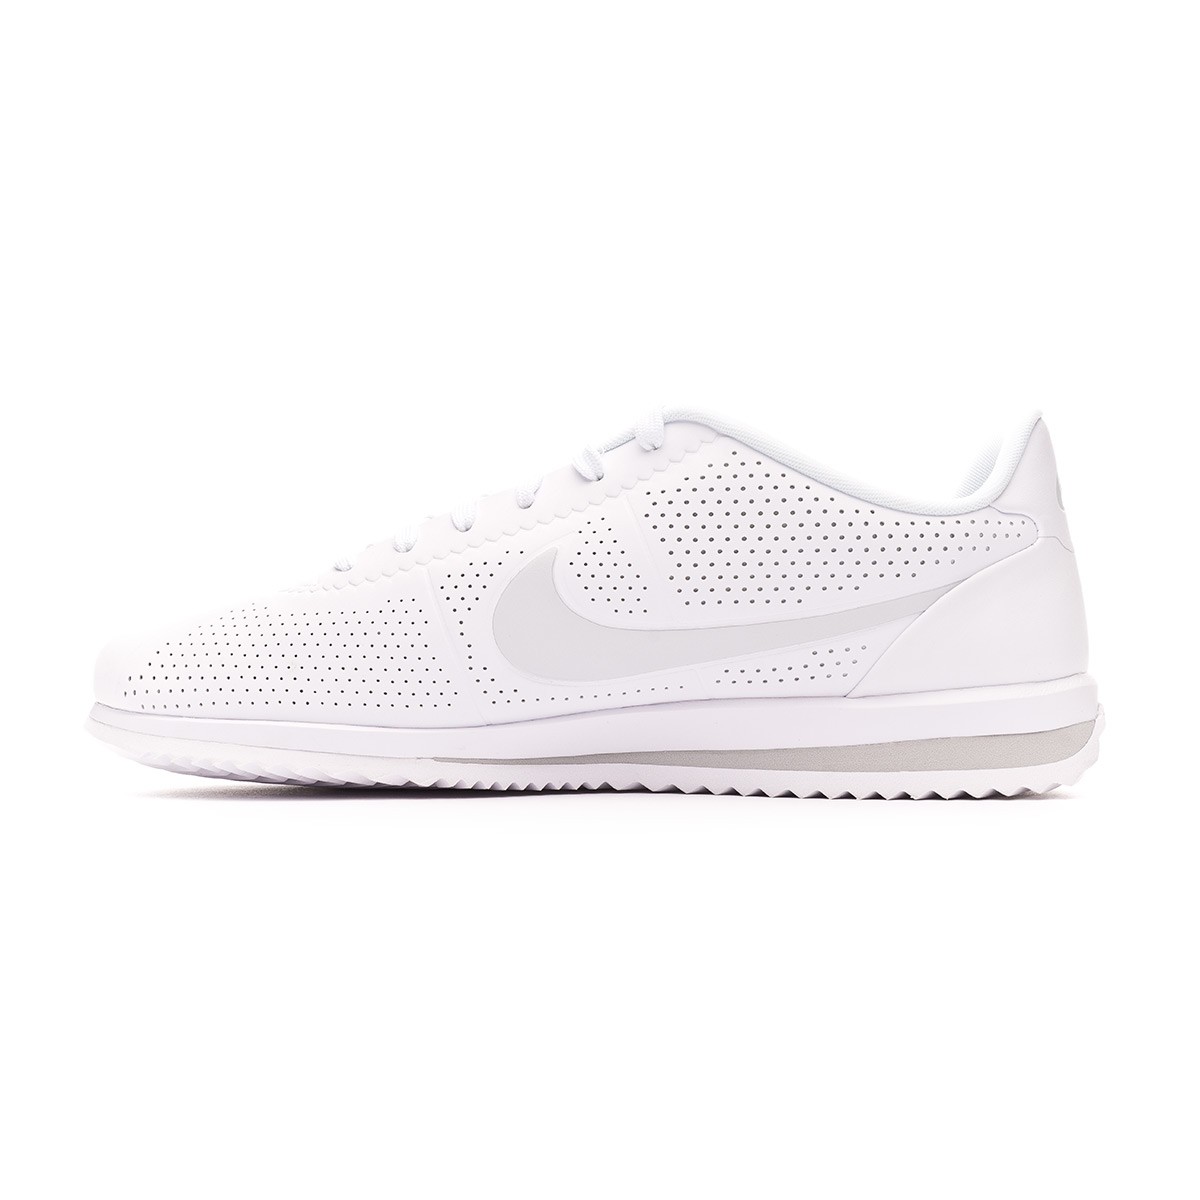 nike cortez ultra moire or